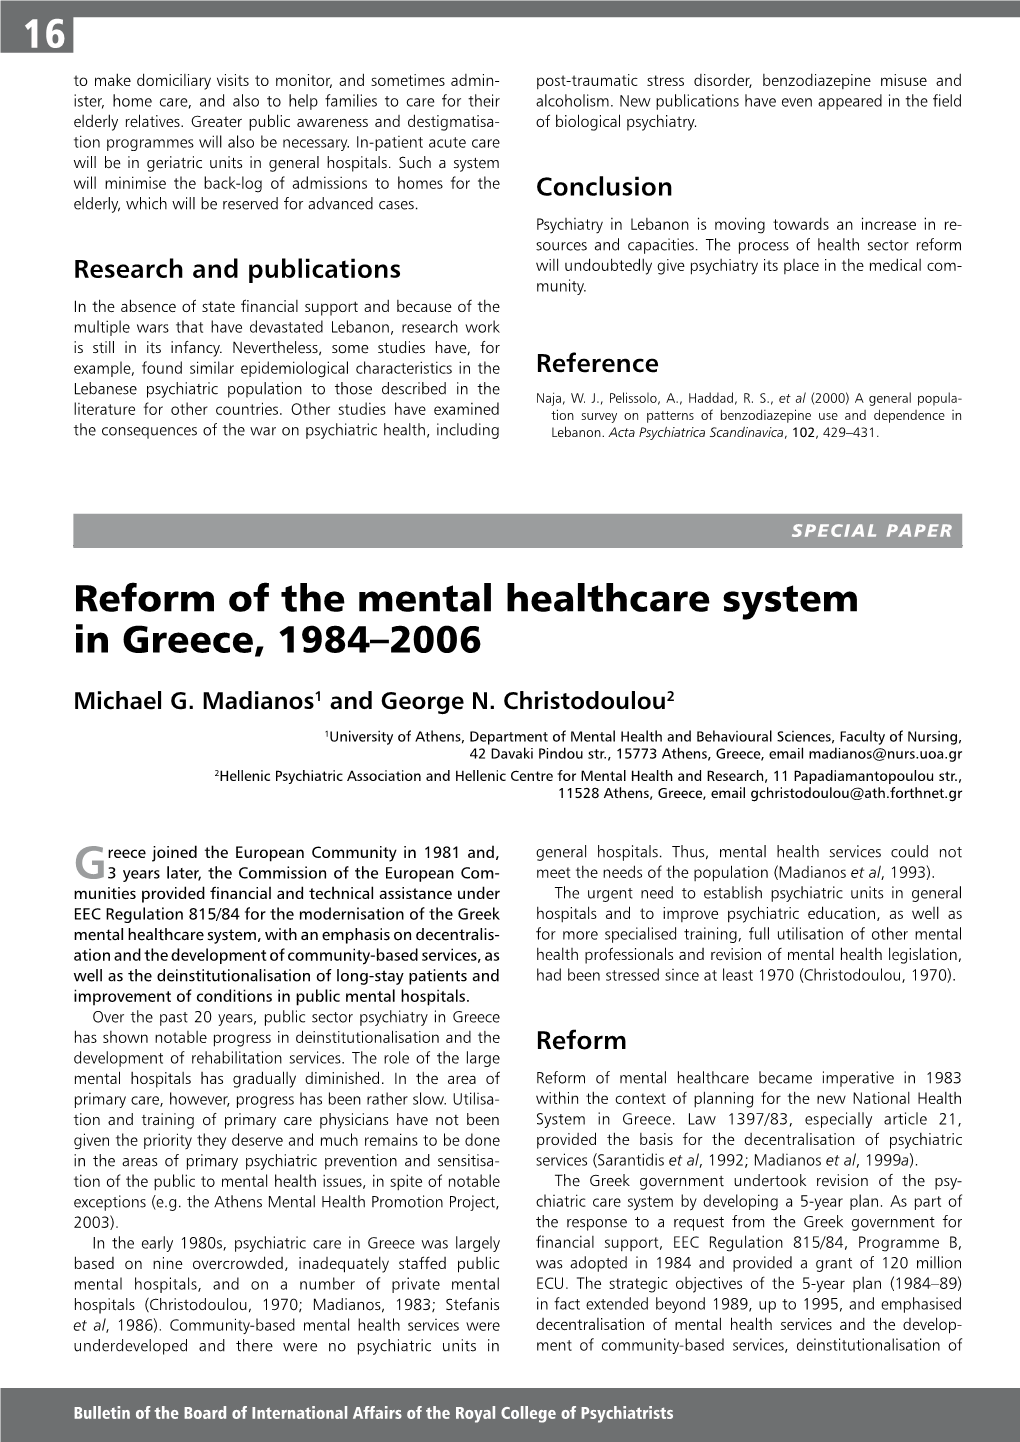 Reform of the Mental Healthcare System in Greece, 1984–2006